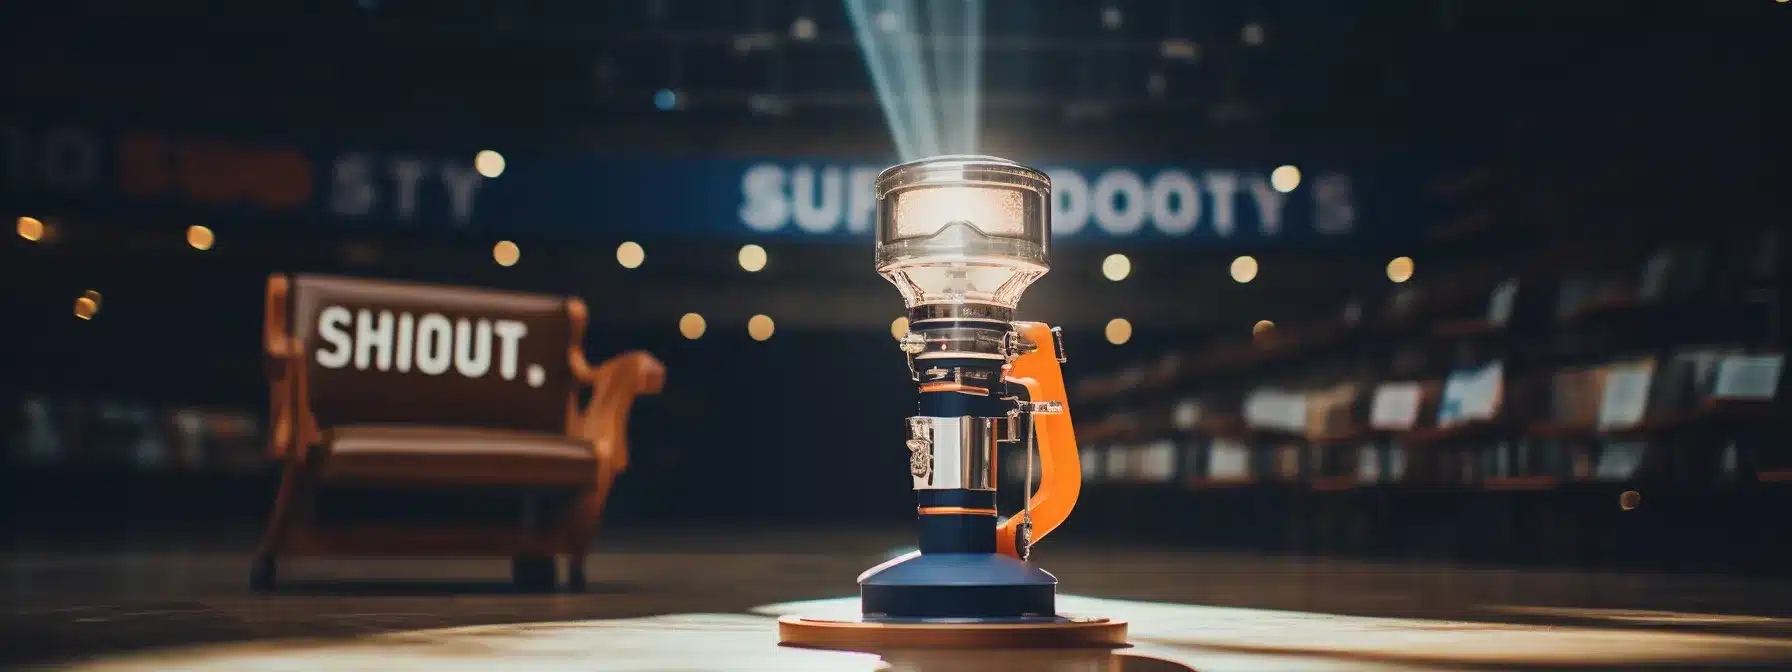 A Spotlight Shining On Dollar Shave Club And Hubspot Logos On A Stage.